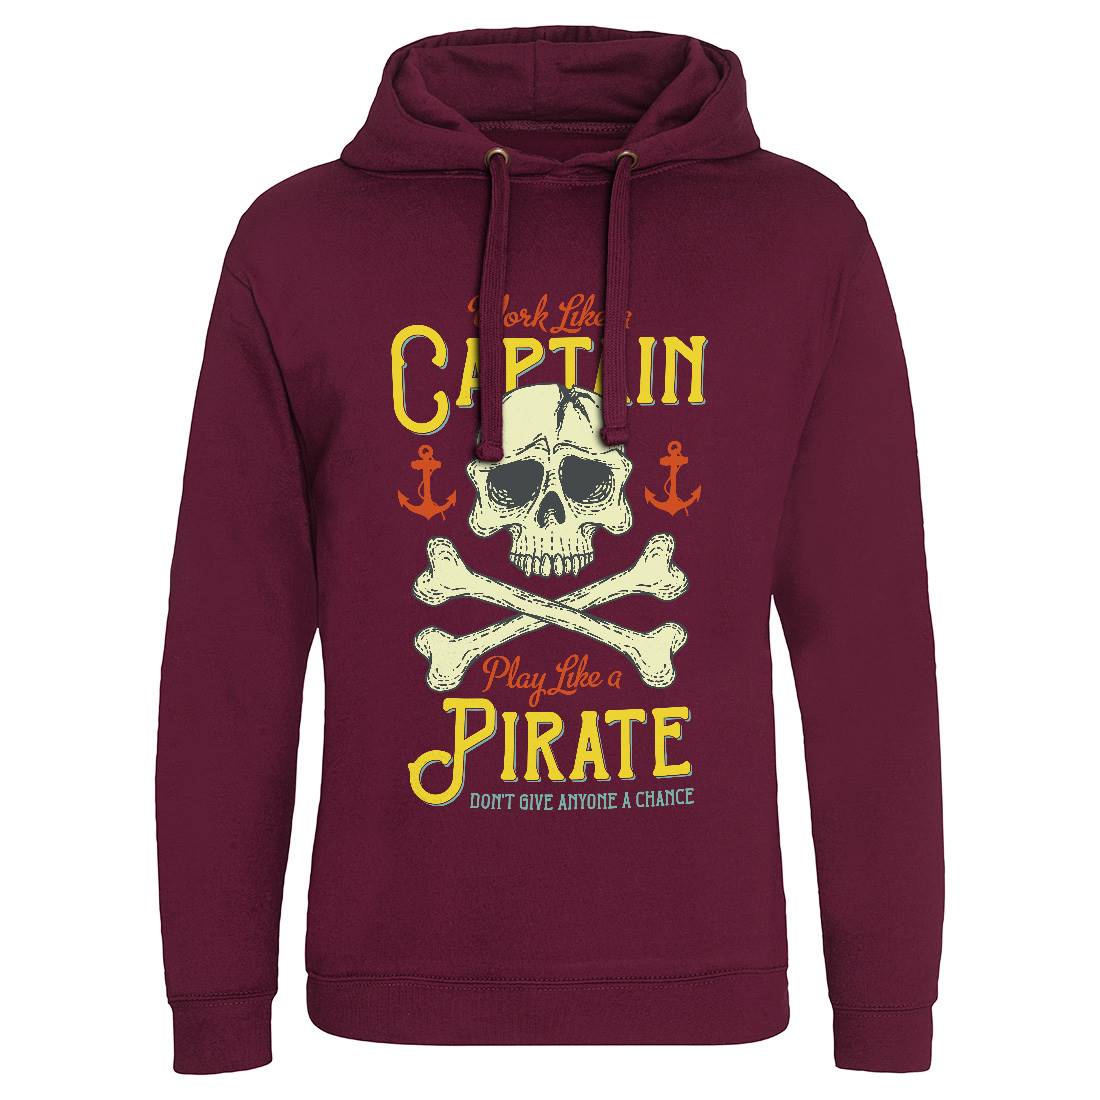 Captain Pirate Mens Hoodie Without Pocket Navy D915